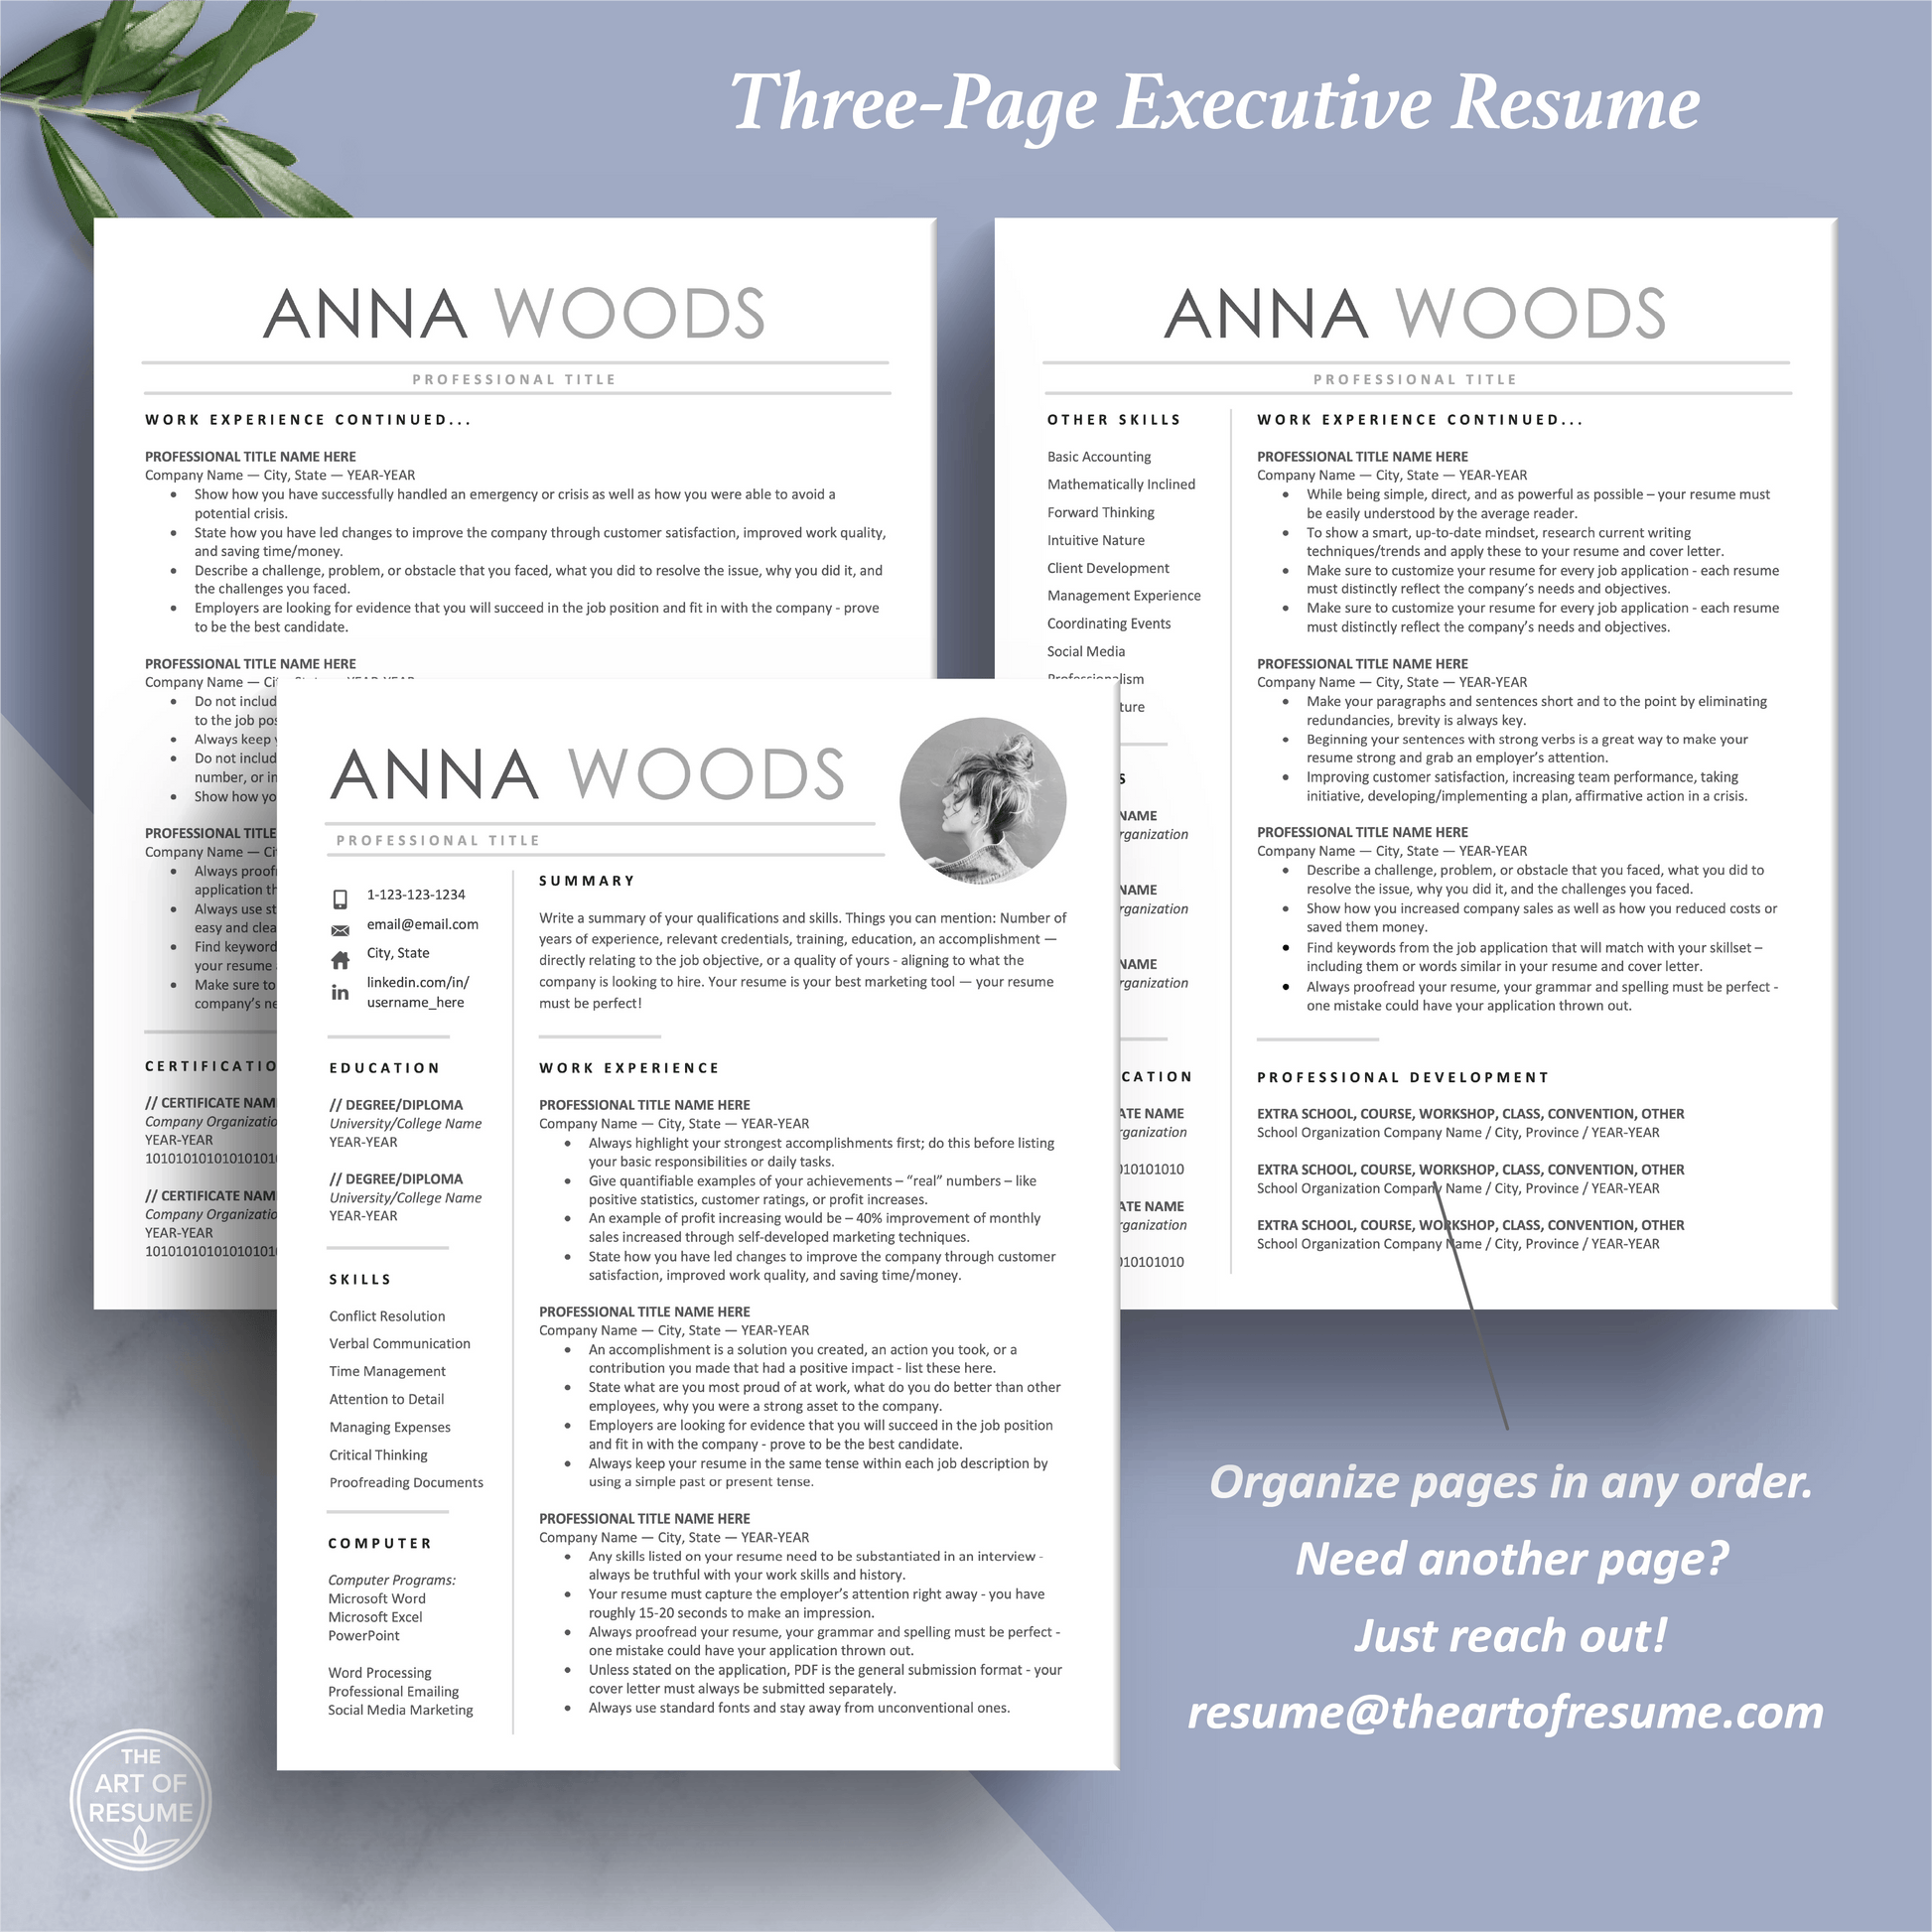 Professional Resume Bundle | Photo Picture Insert - The Art of Resume